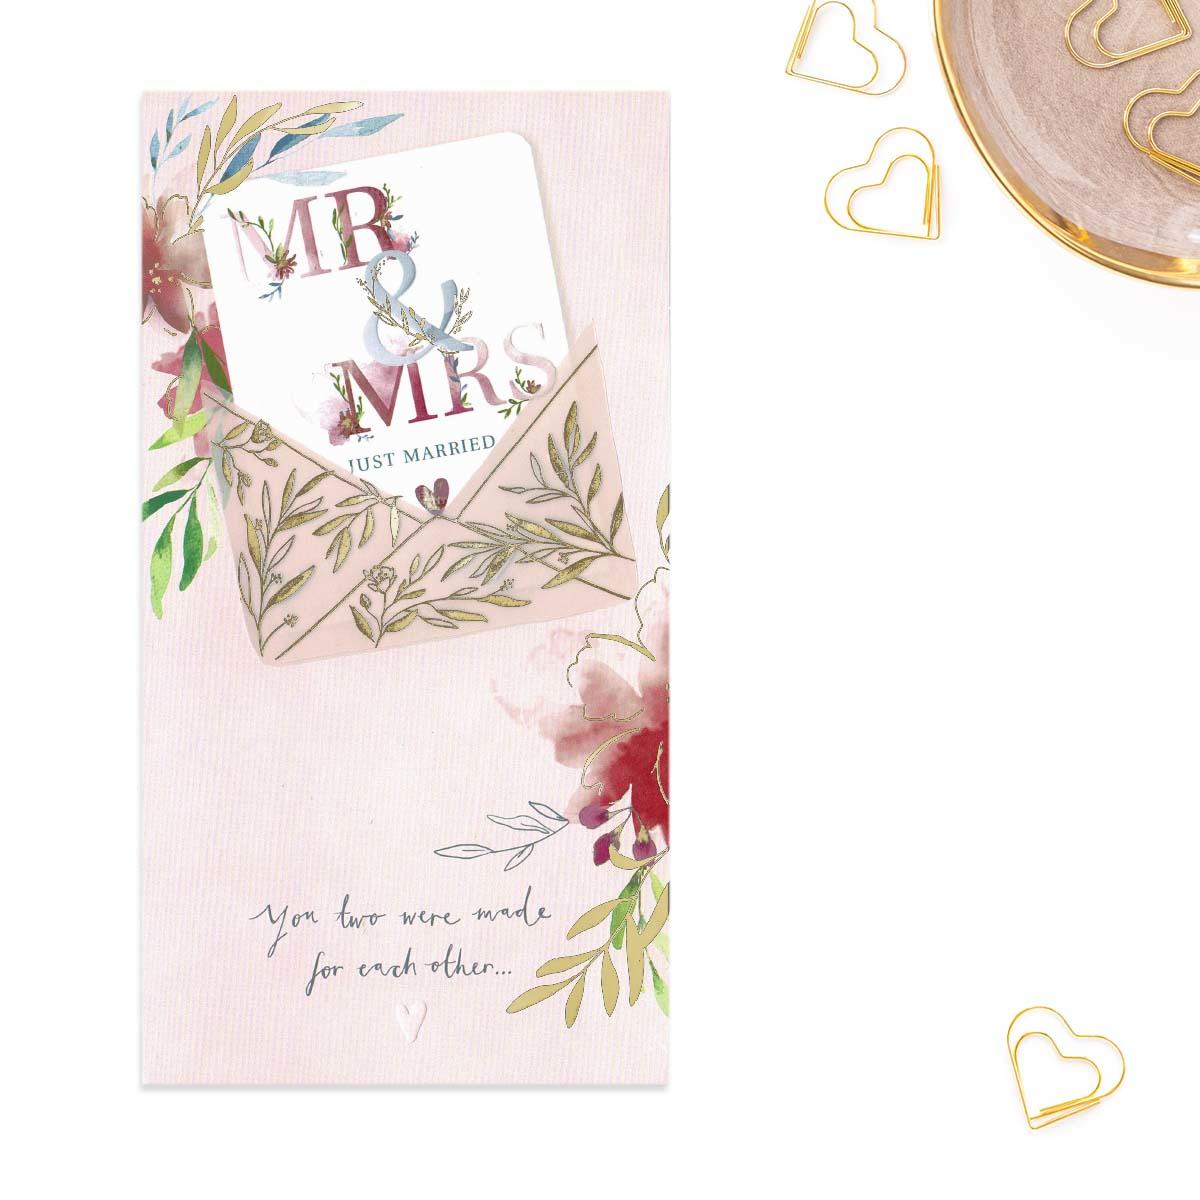 Mr & Mrs Just Married Wedding Day Card Front Image